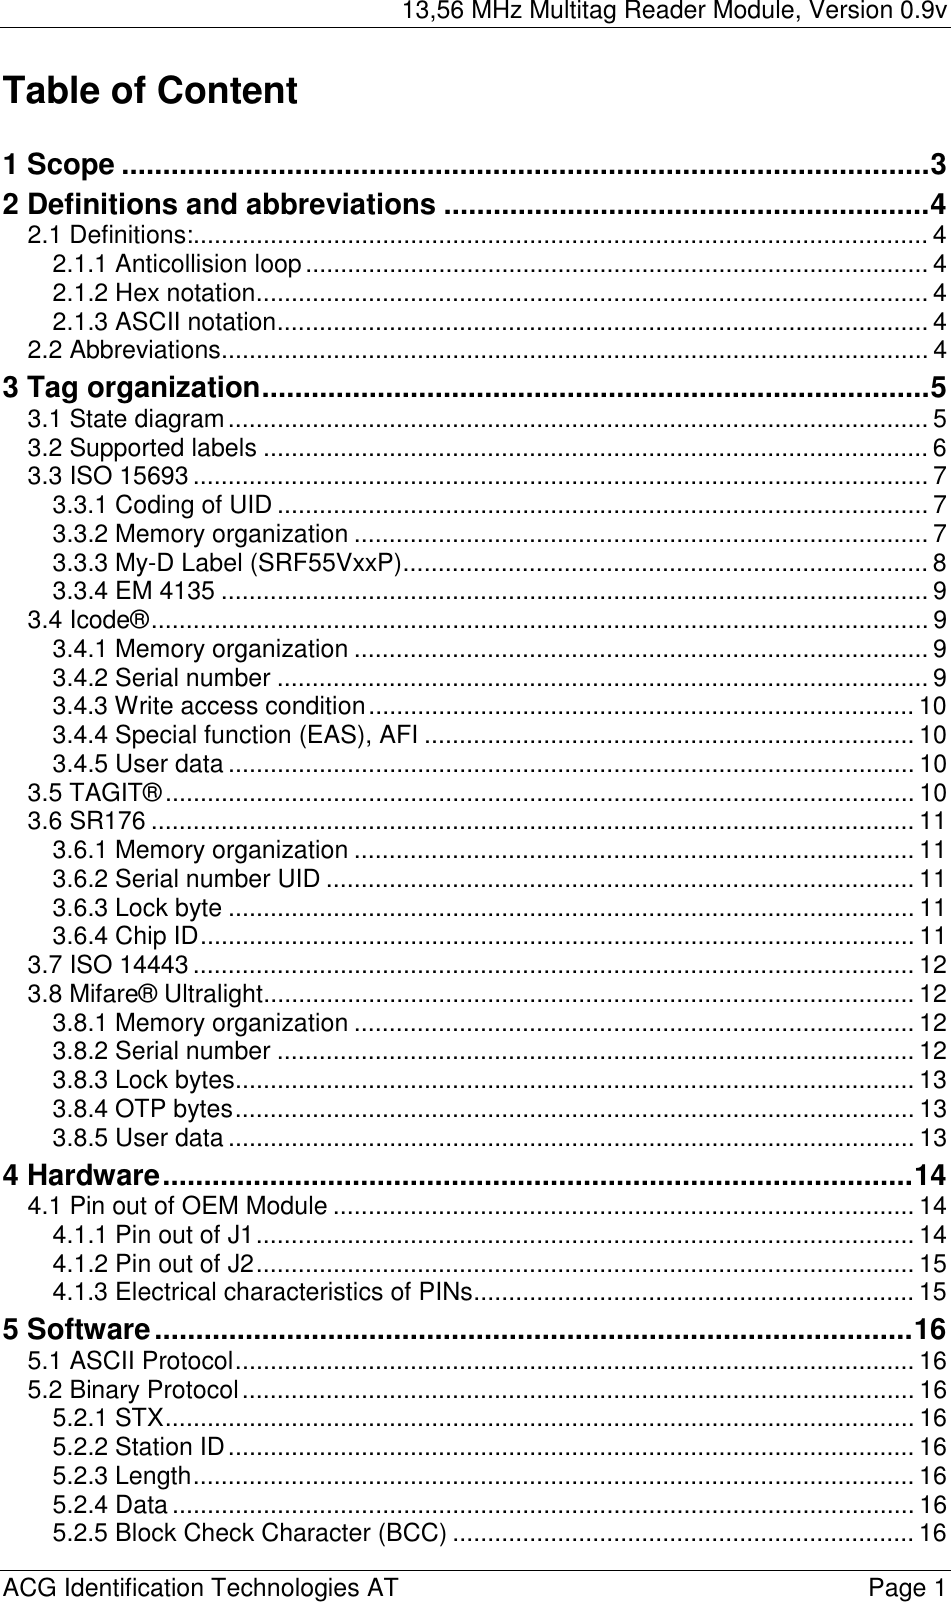 13,56 MHz Multitag Reader Module, Version 0.9v  ACG Identification Technologies AT    Page 1 Table of Content  1 Scope ..................................................................................................3 2 Definitions and abbreviations ...........................................................4 2.1 Definitions:......................................................................................................... 4 2.1.1 Anticollision loop......................................................................................... 4 2.1.2 Hex notation................................................................................................ 4 2.1.3 ASCII notation............................................................................................. 4 2.2 Abbreviations..................................................................................................... 4 3 Tag organization.................................................................................5 3.1 State diagram.................................................................................................... 5 3.2 Supported labels ............................................................................................... 6 3.3 ISO 15693 ......................................................................................................... 7 3.3.1 Coding of UID ............................................................................................. 7 3.3.2 Memory organization .................................................................................. 7 3.3.3 My-D Label (SRF55VxxP)........................................................................... 8 3.3.4 EM 4135 ..................................................................................................... 9 3.4 Icode®............................................................................................................... 9 3.4.1 Memory organization .................................................................................. 9 3.4.2 Serial number ............................................................................................. 9 3.4.3 Write access condition.............................................................................. 10 3.4.4 Special function (EAS), AFI ...................................................................... 10 3.4.5 User data .................................................................................................. 10 3.5 TAGIT®........................................................................................................... 10 3.6 SR176 ............................................................................................................. 11 3.6.1 Memory organization ................................................................................ 11 3.6.2 Serial number UID .................................................................................... 11 3.6.3 Lock byte .................................................................................................. 11 3.6.4 Chip ID...................................................................................................... 11 3.7 ISO 14443 ....................................................................................................... 12 3.8 Mifare® Ultralight............................................................................................. 12 3.8.1 Memory organization ................................................................................ 12 3.8.2 Serial number ........................................................................................... 12 3.8.3 Lock bytes................................................................................................. 13 3.8.4 OTP bytes................................................................................................. 13 3.8.5 User data .................................................................................................. 13 4 Hardware...........................................................................................14 4.1 Pin out of OEM Module ................................................................................... 14 4.1.1 Pin out of J1.............................................................................................. 14 4.1.2 Pin out of J2.............................................................................................. 15 4.1.3 Electrical characteristics of PINs............................................................... 15 5 Software............................................................................................16 5.1 ASCII Protocol................................................................................................. 16 5.2 Binary Protocol................................................................................................ 16 5.2.1 STX........................................................................................................... 16 5.2.2 Station ID.................................................................................................. 16 5.2.3 Length....................................................................................................... 16 5.2.4 Data.......................................................................................................... 16 5.2.5 Block Check Character (BCC) .................................................................. 16 